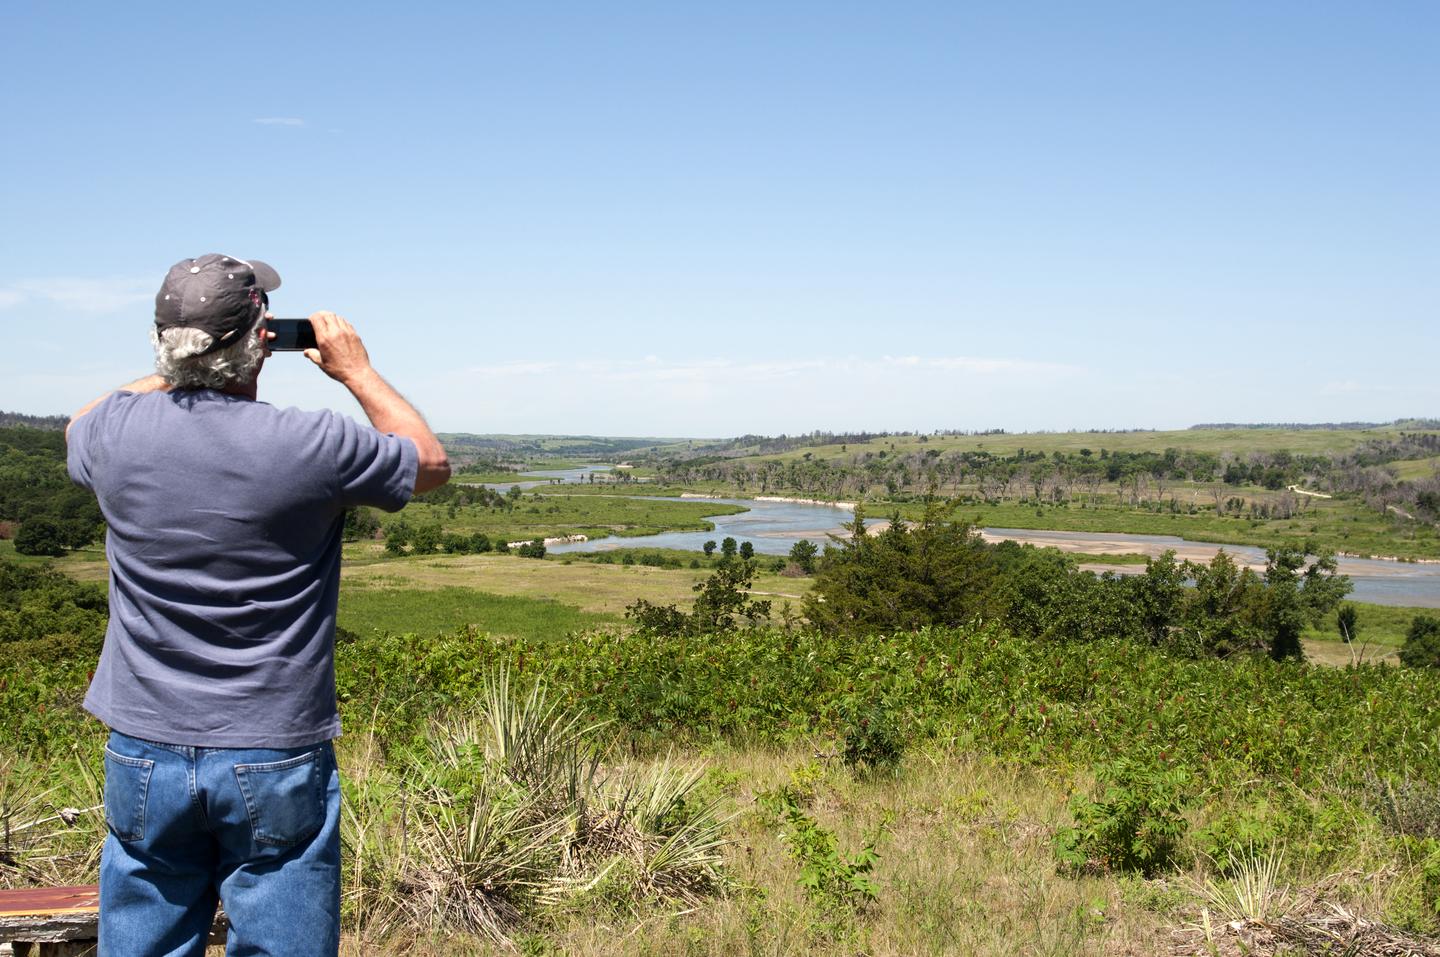 Taking photos along the Niobrara NSRParts of the river are shallow and meandering, making beautiful backdrops for people to take photographs.